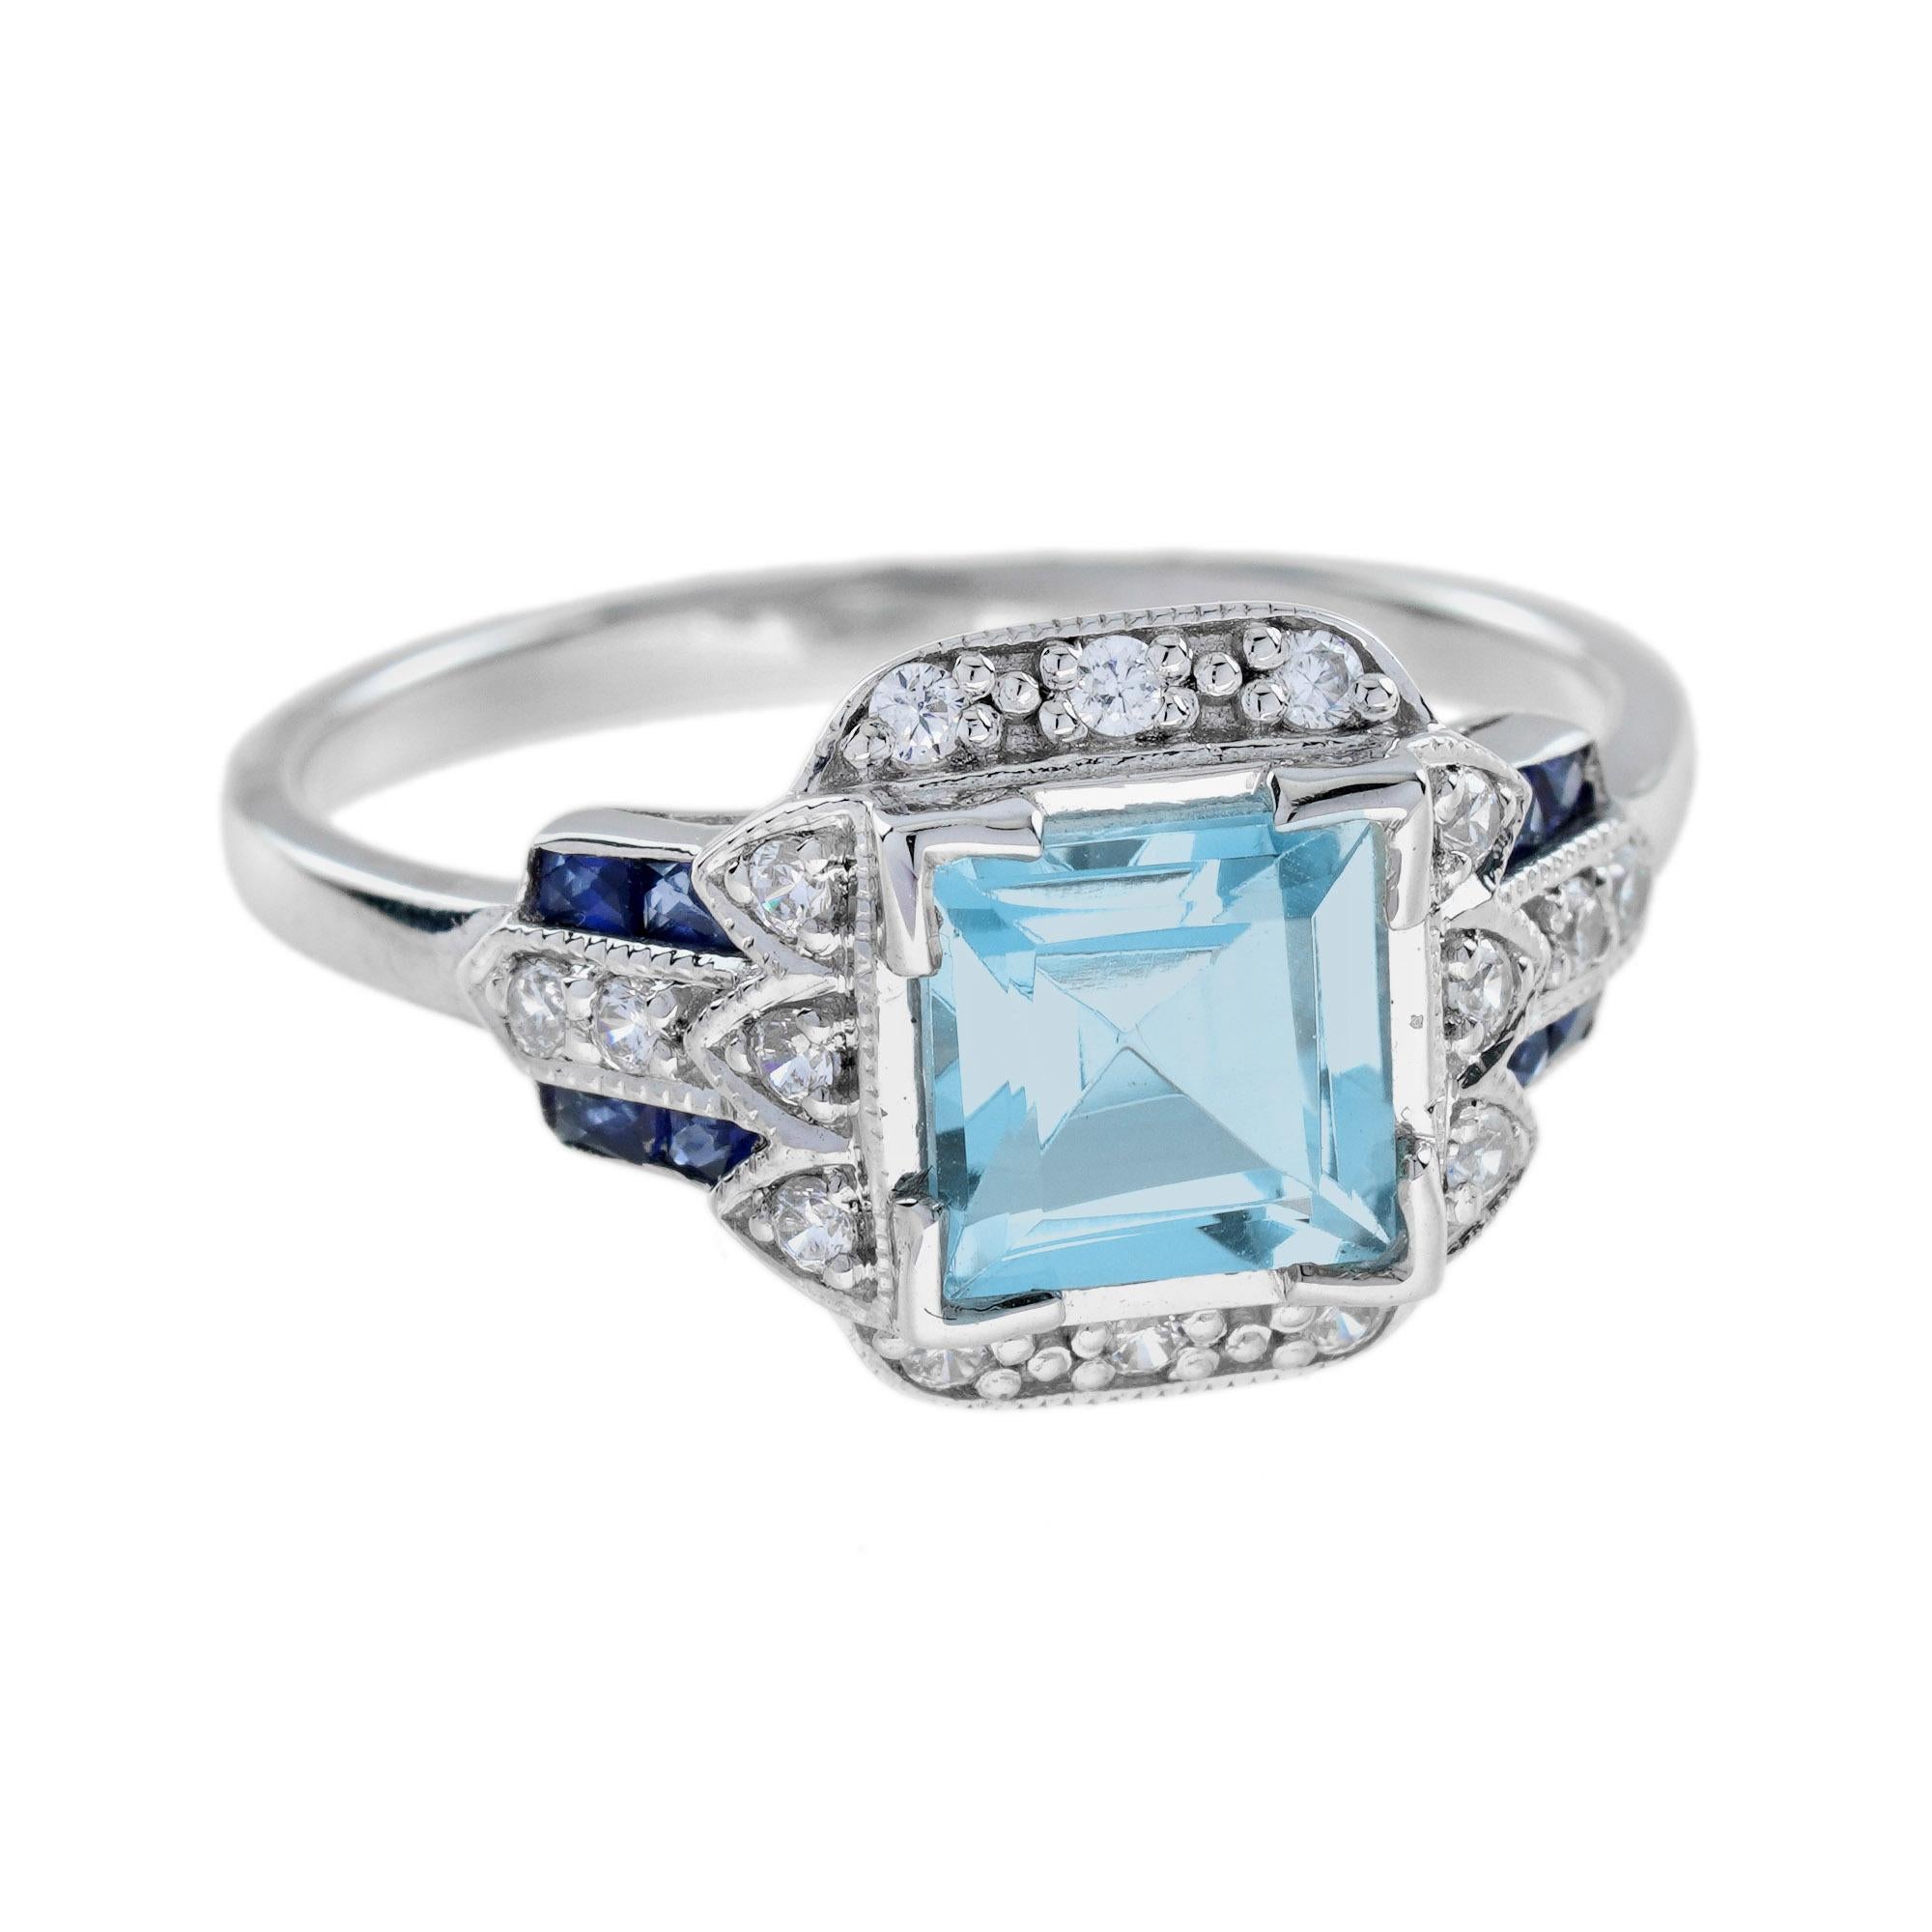 For Sale:  Square Blue Topaz Sapphire Diamond Art Deco Style Engagement Ring in 14K Gold 3